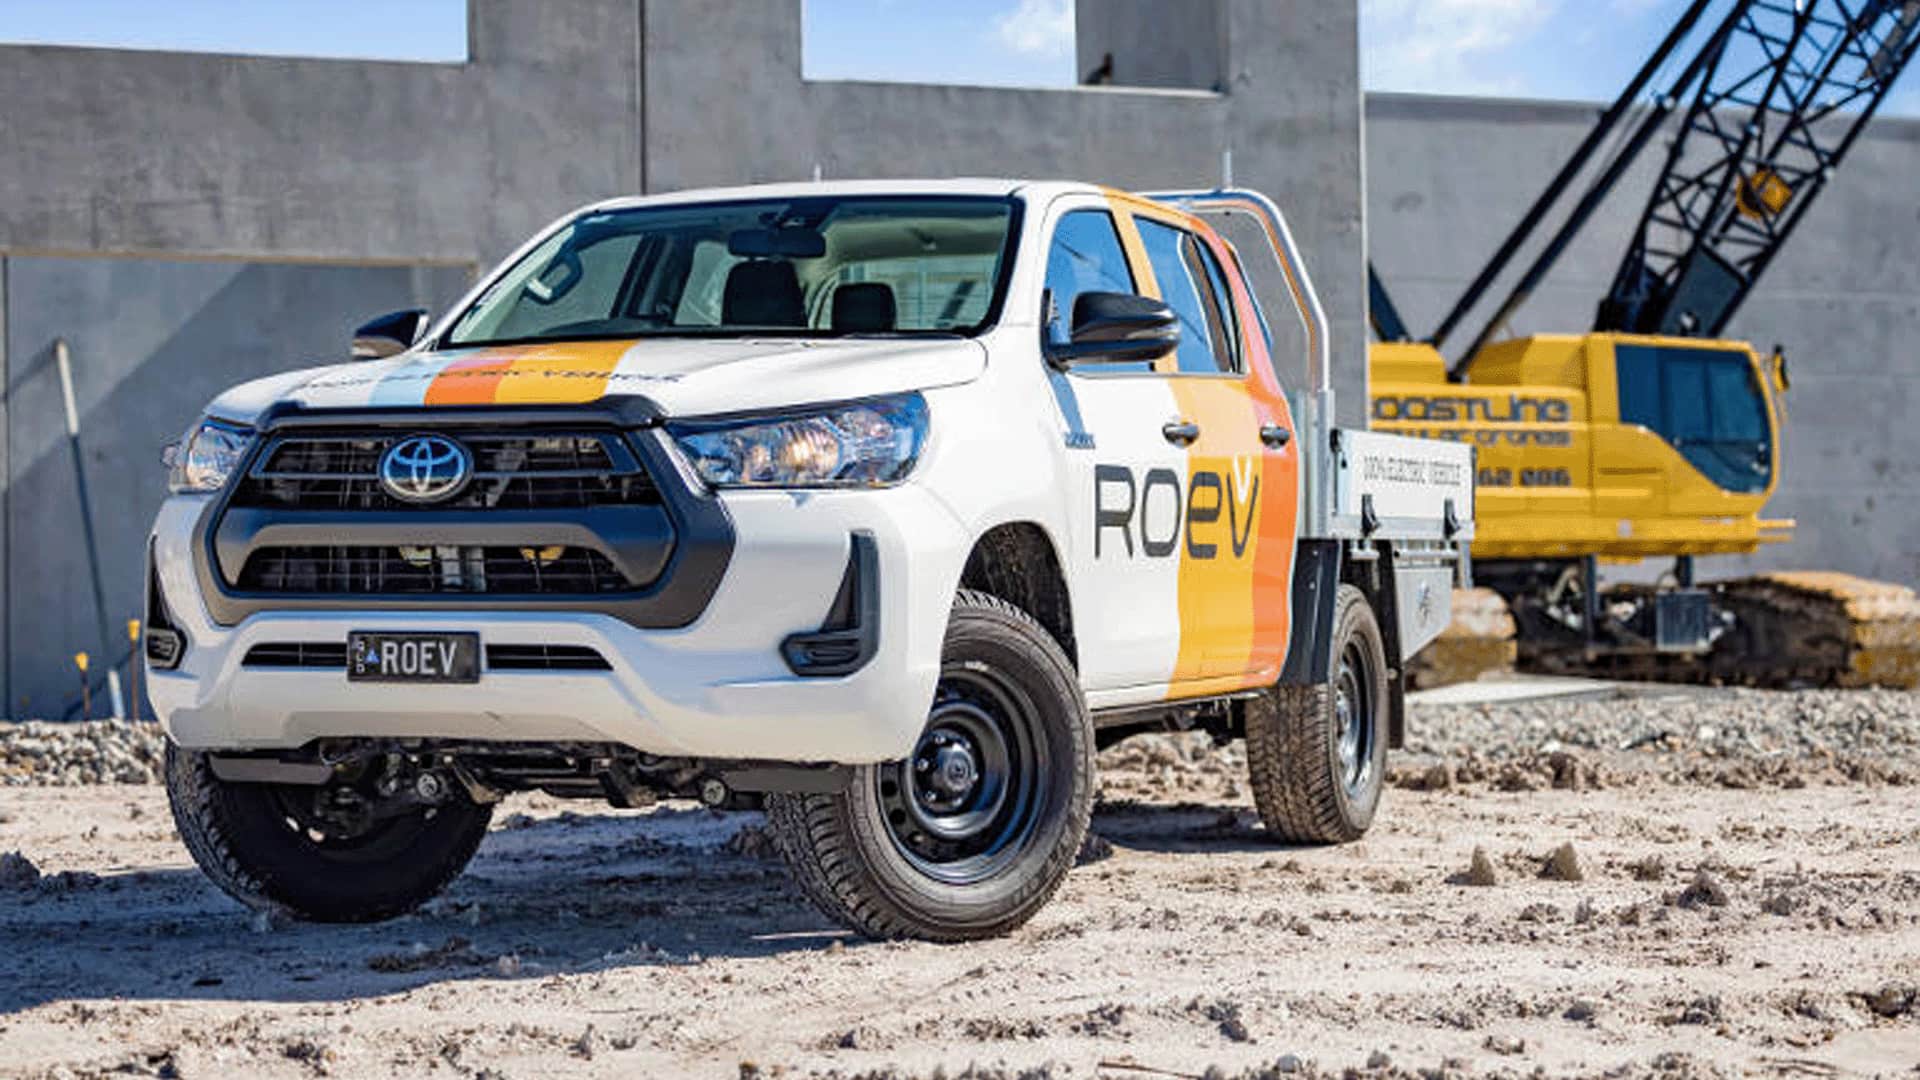 White ROEV Toyota Hilux in front of yellow crane at a construction site